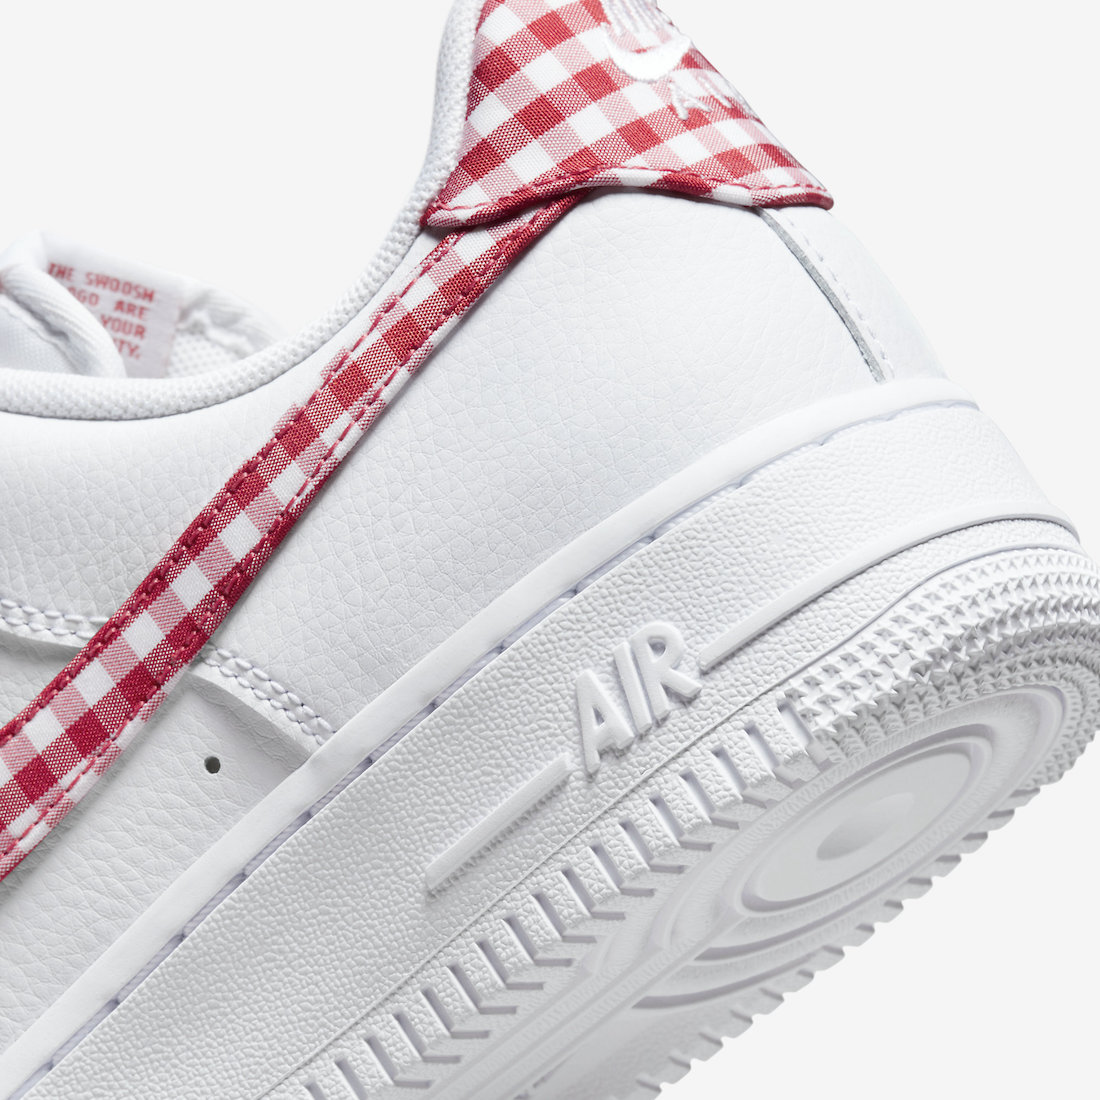 Nike Air Force 1 Low Red Gingham DZ2784-101